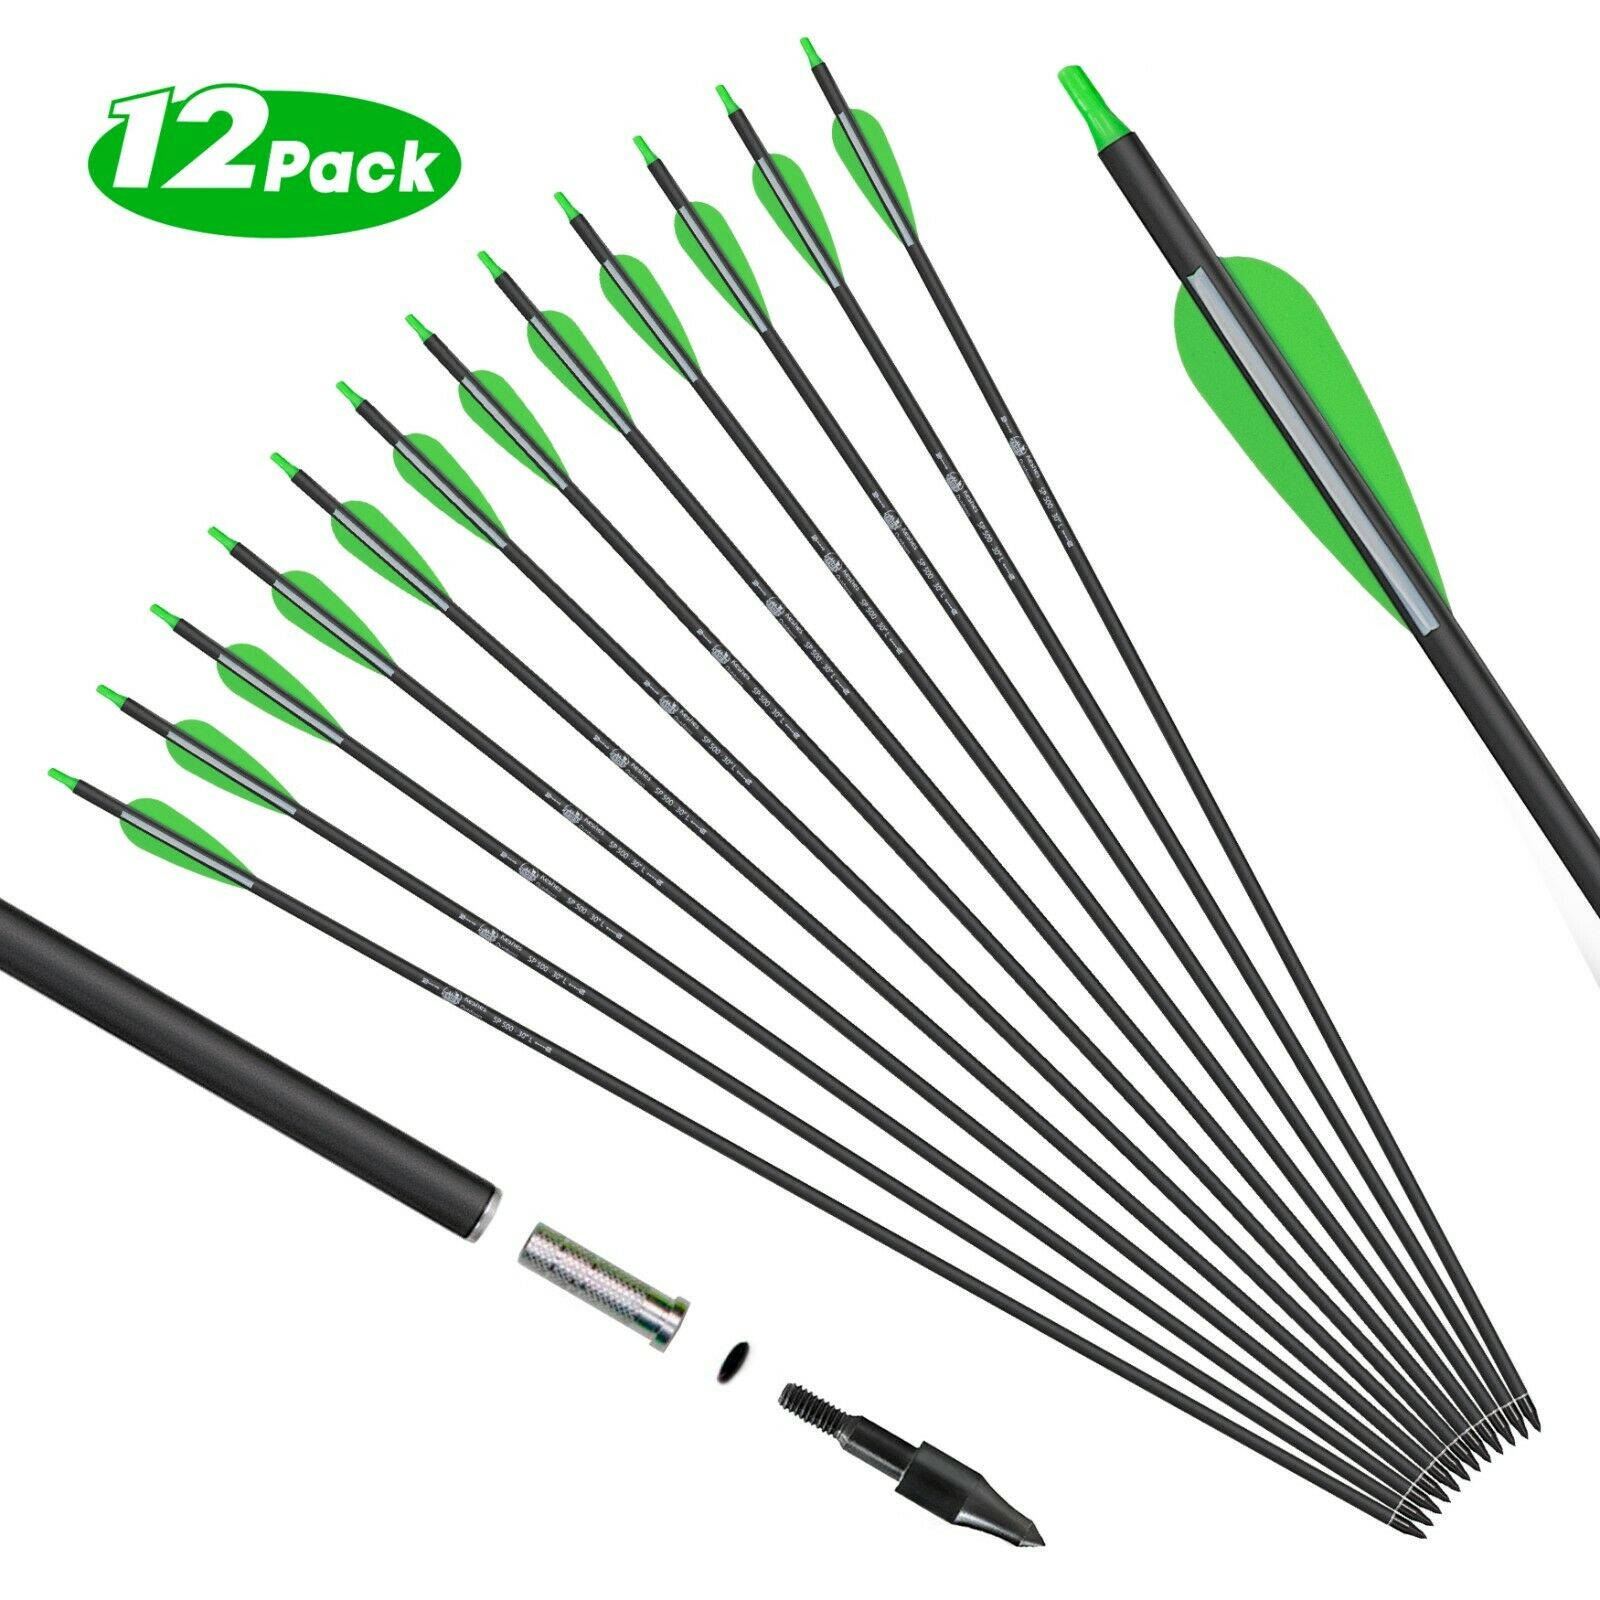 12 Archery Carbon Hunting Target Arrows 30" Spine 500 - Recurve & Compound Bows